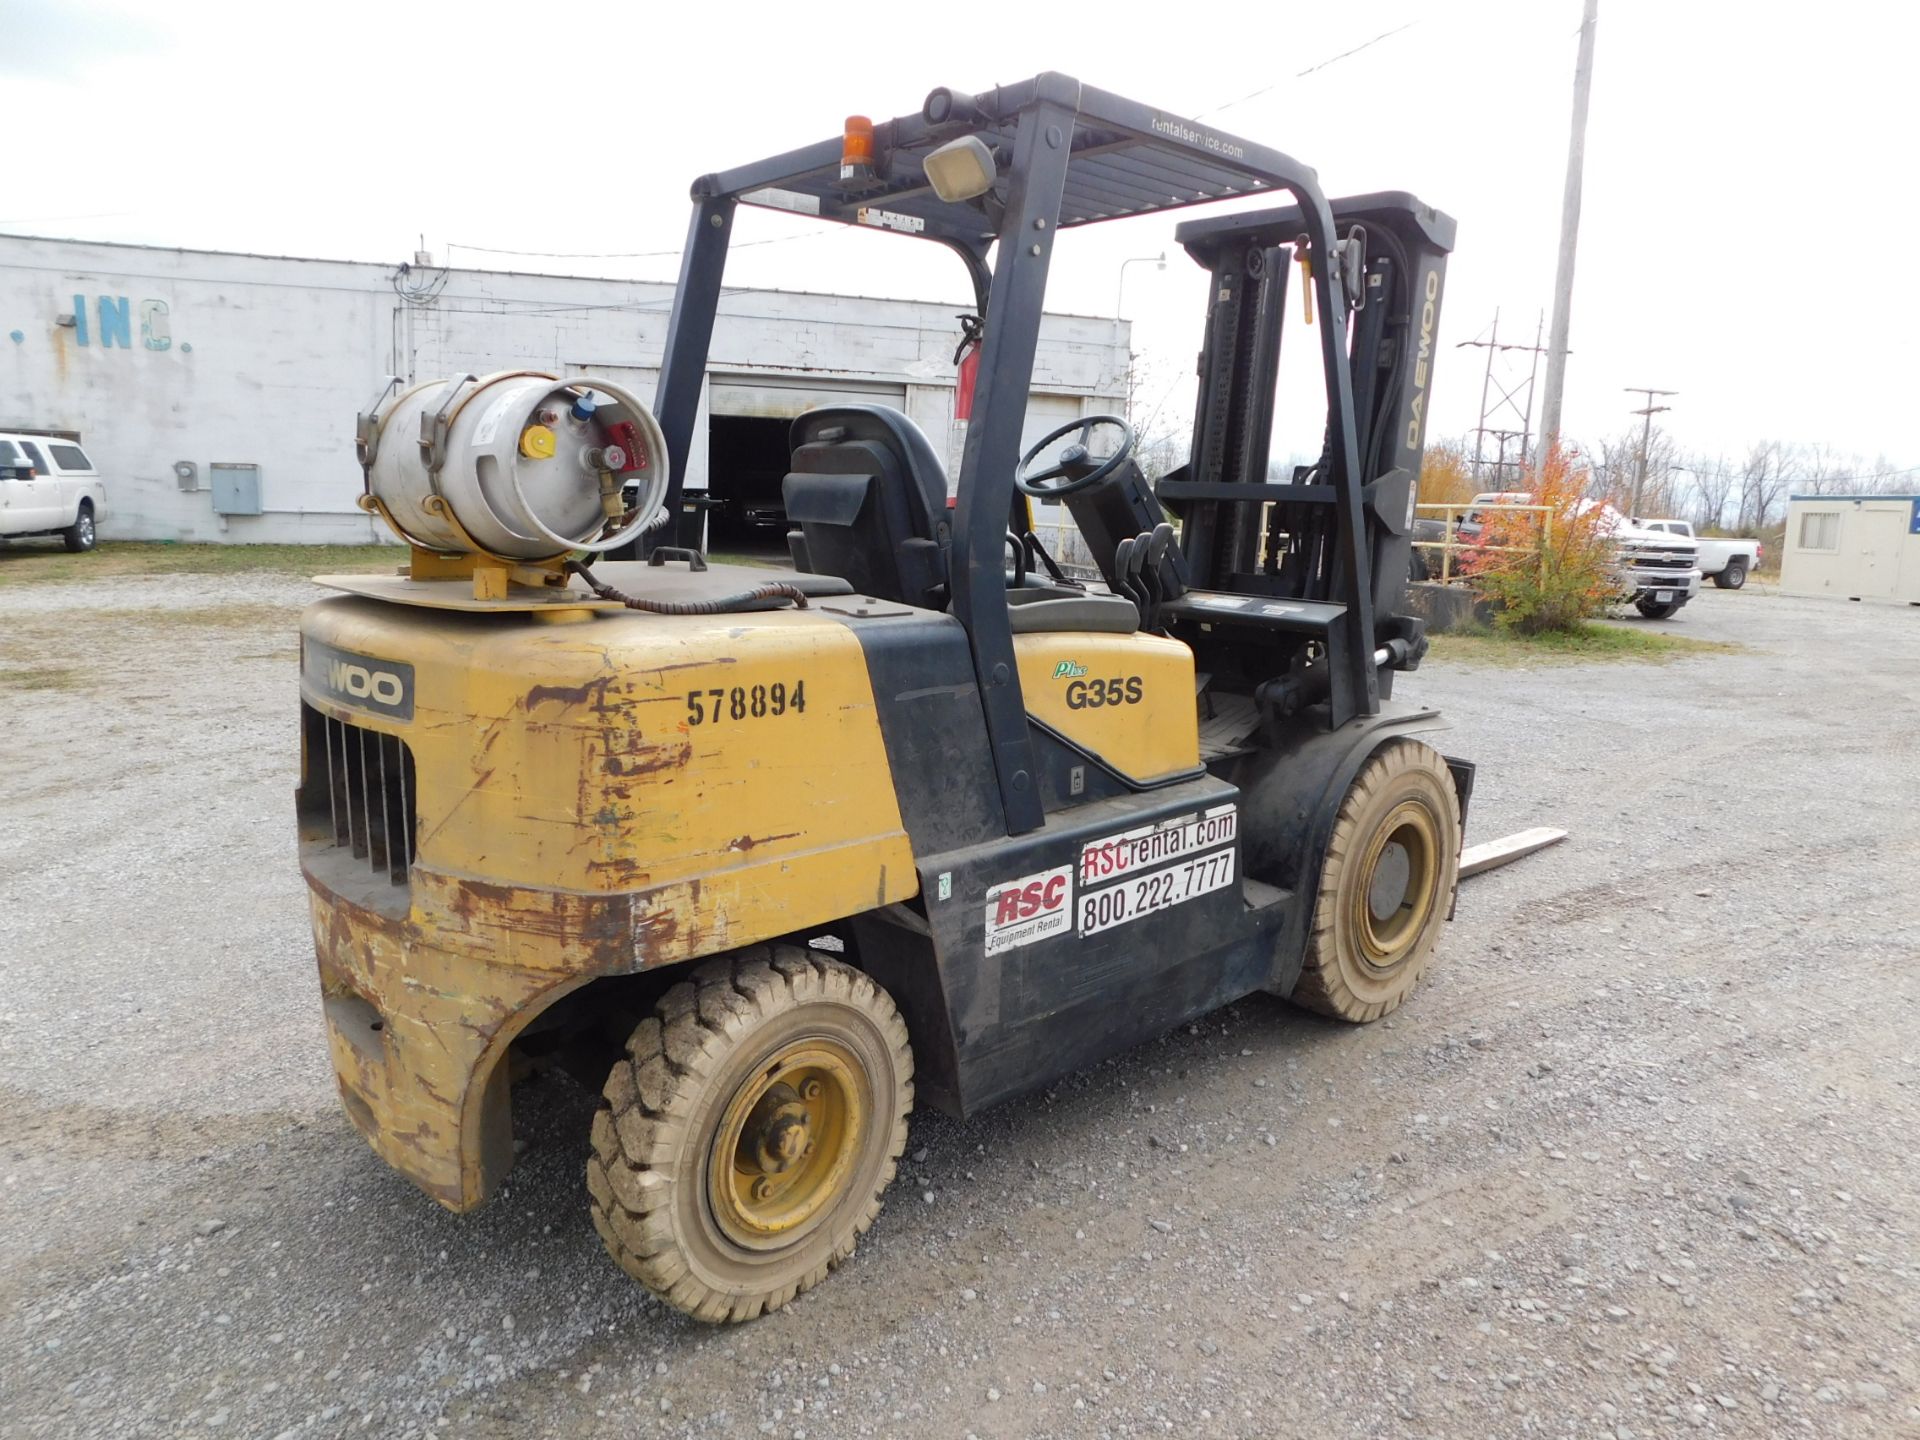 Daewoo Model G35S-2 Forklift, SN G2-00191, 6,700 lb. cap., LP, Solid Pneumatic Non-Marking Tires, - Image 6 of 20